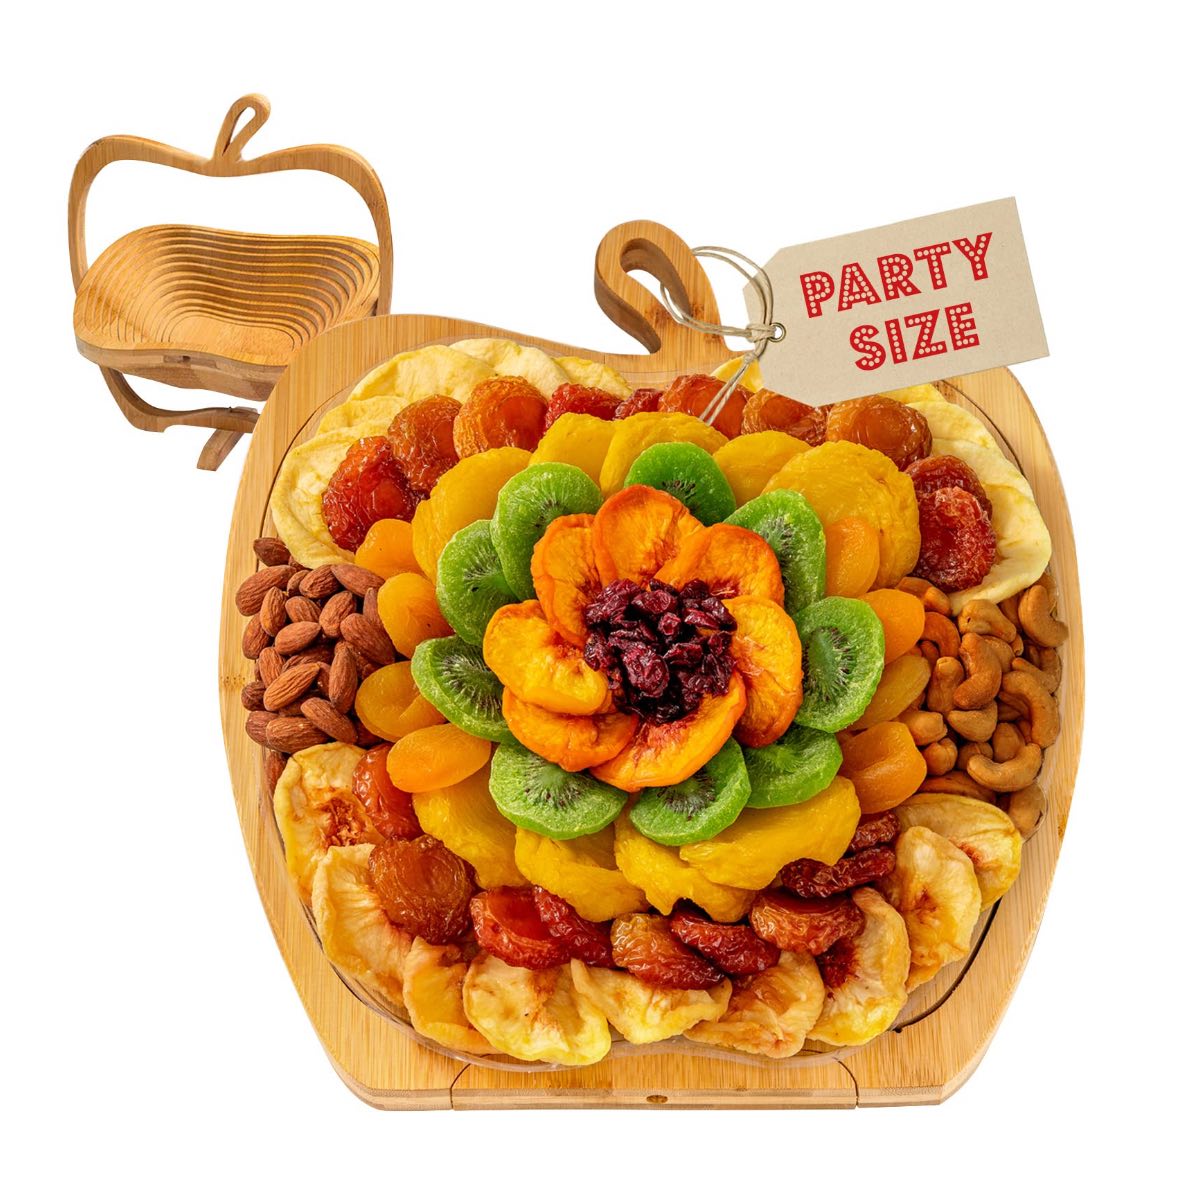 A platter of dried fruit in an apple-shaped basket for gifting.